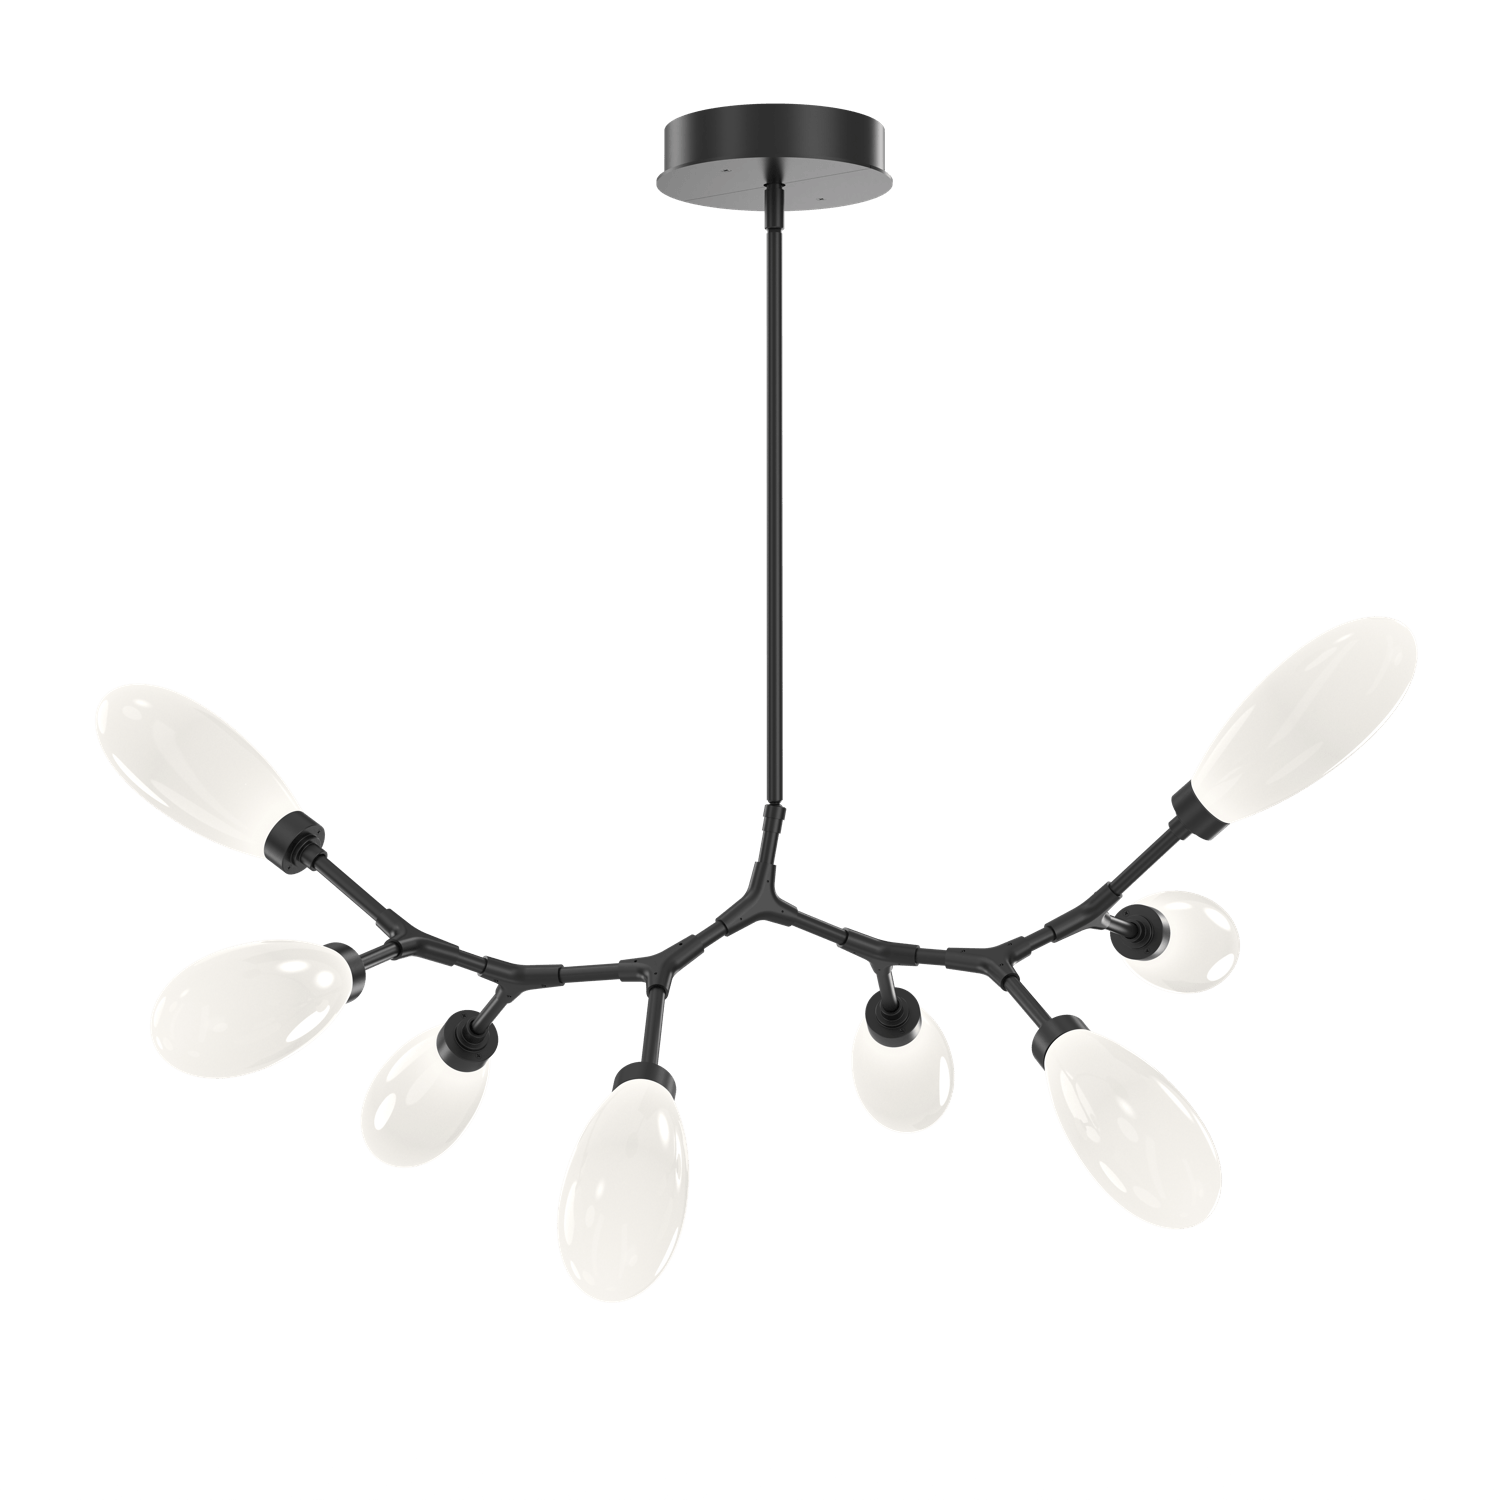 PLB0071-BB-MB-WL-LL-Hammerton-Studio-Fiori-8-light-organic-branch-chandelier-with-matte-black-finish-and-opal-white-glass-shades-and-LED-lamping